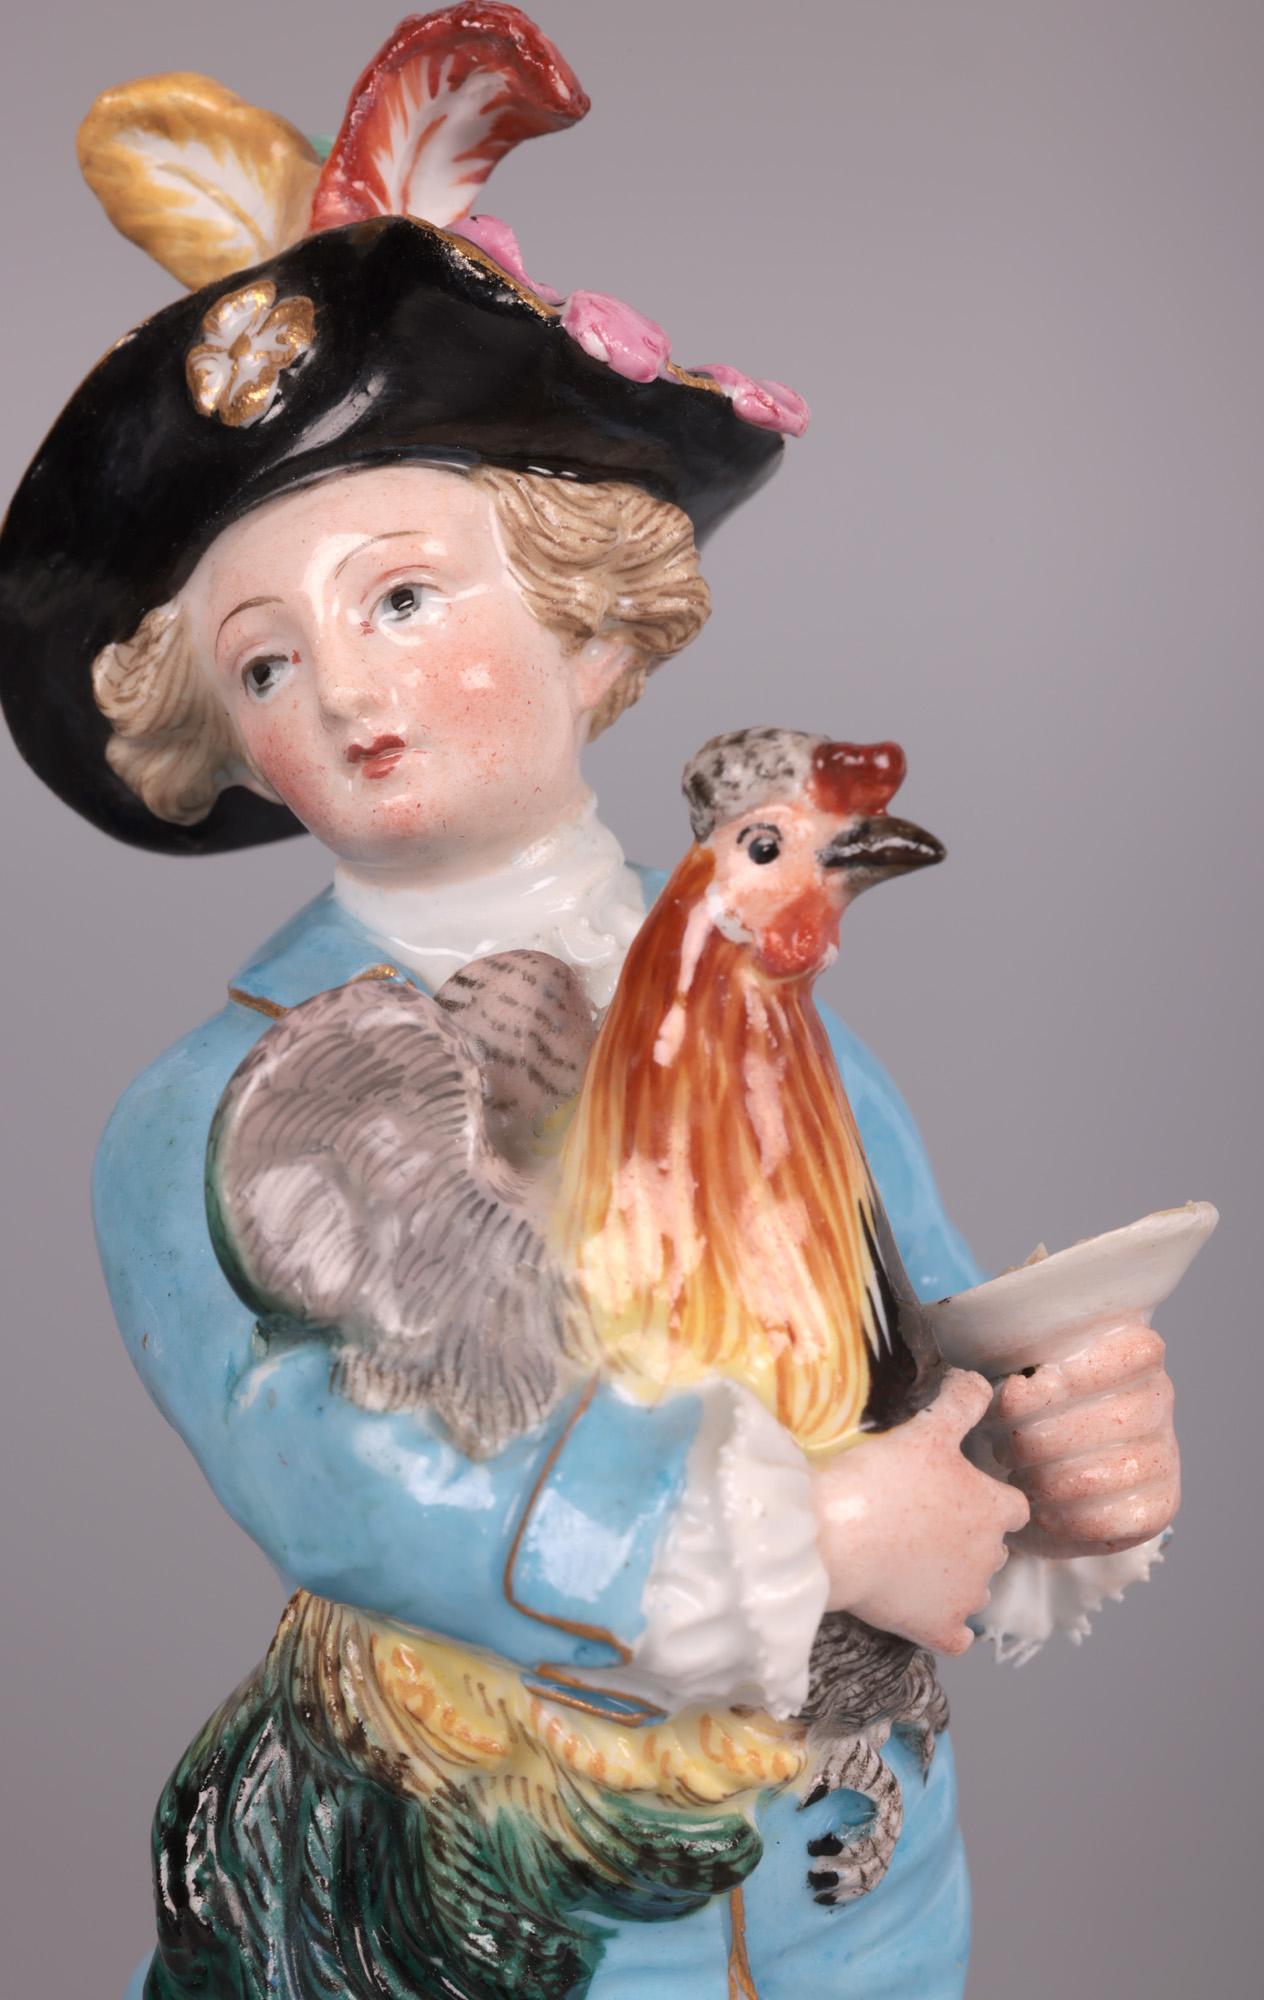 A rare and stunning pair German porcelain figures holding birds attributed to Johann Joachim Kändler (German 1706 – 1775) for world renowned makers Meissen and dating from the 19th century. 

Johann Joachim Kändler joined Meissen in 1731 and was a